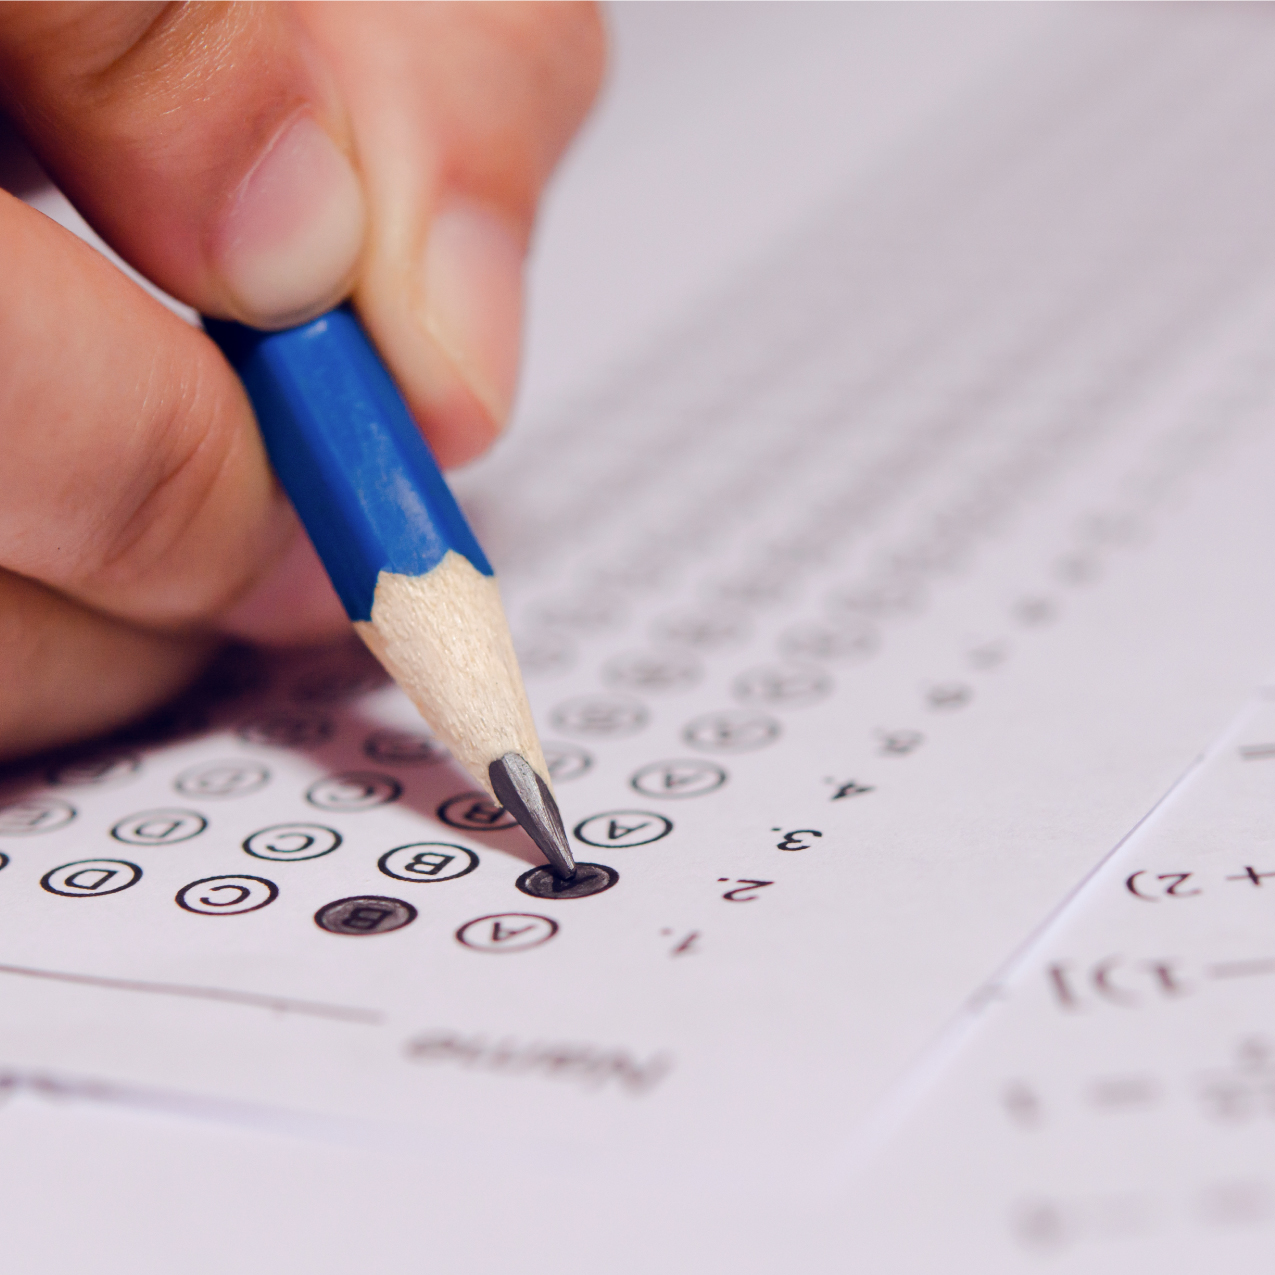 marking-of-student's-test-scores-2